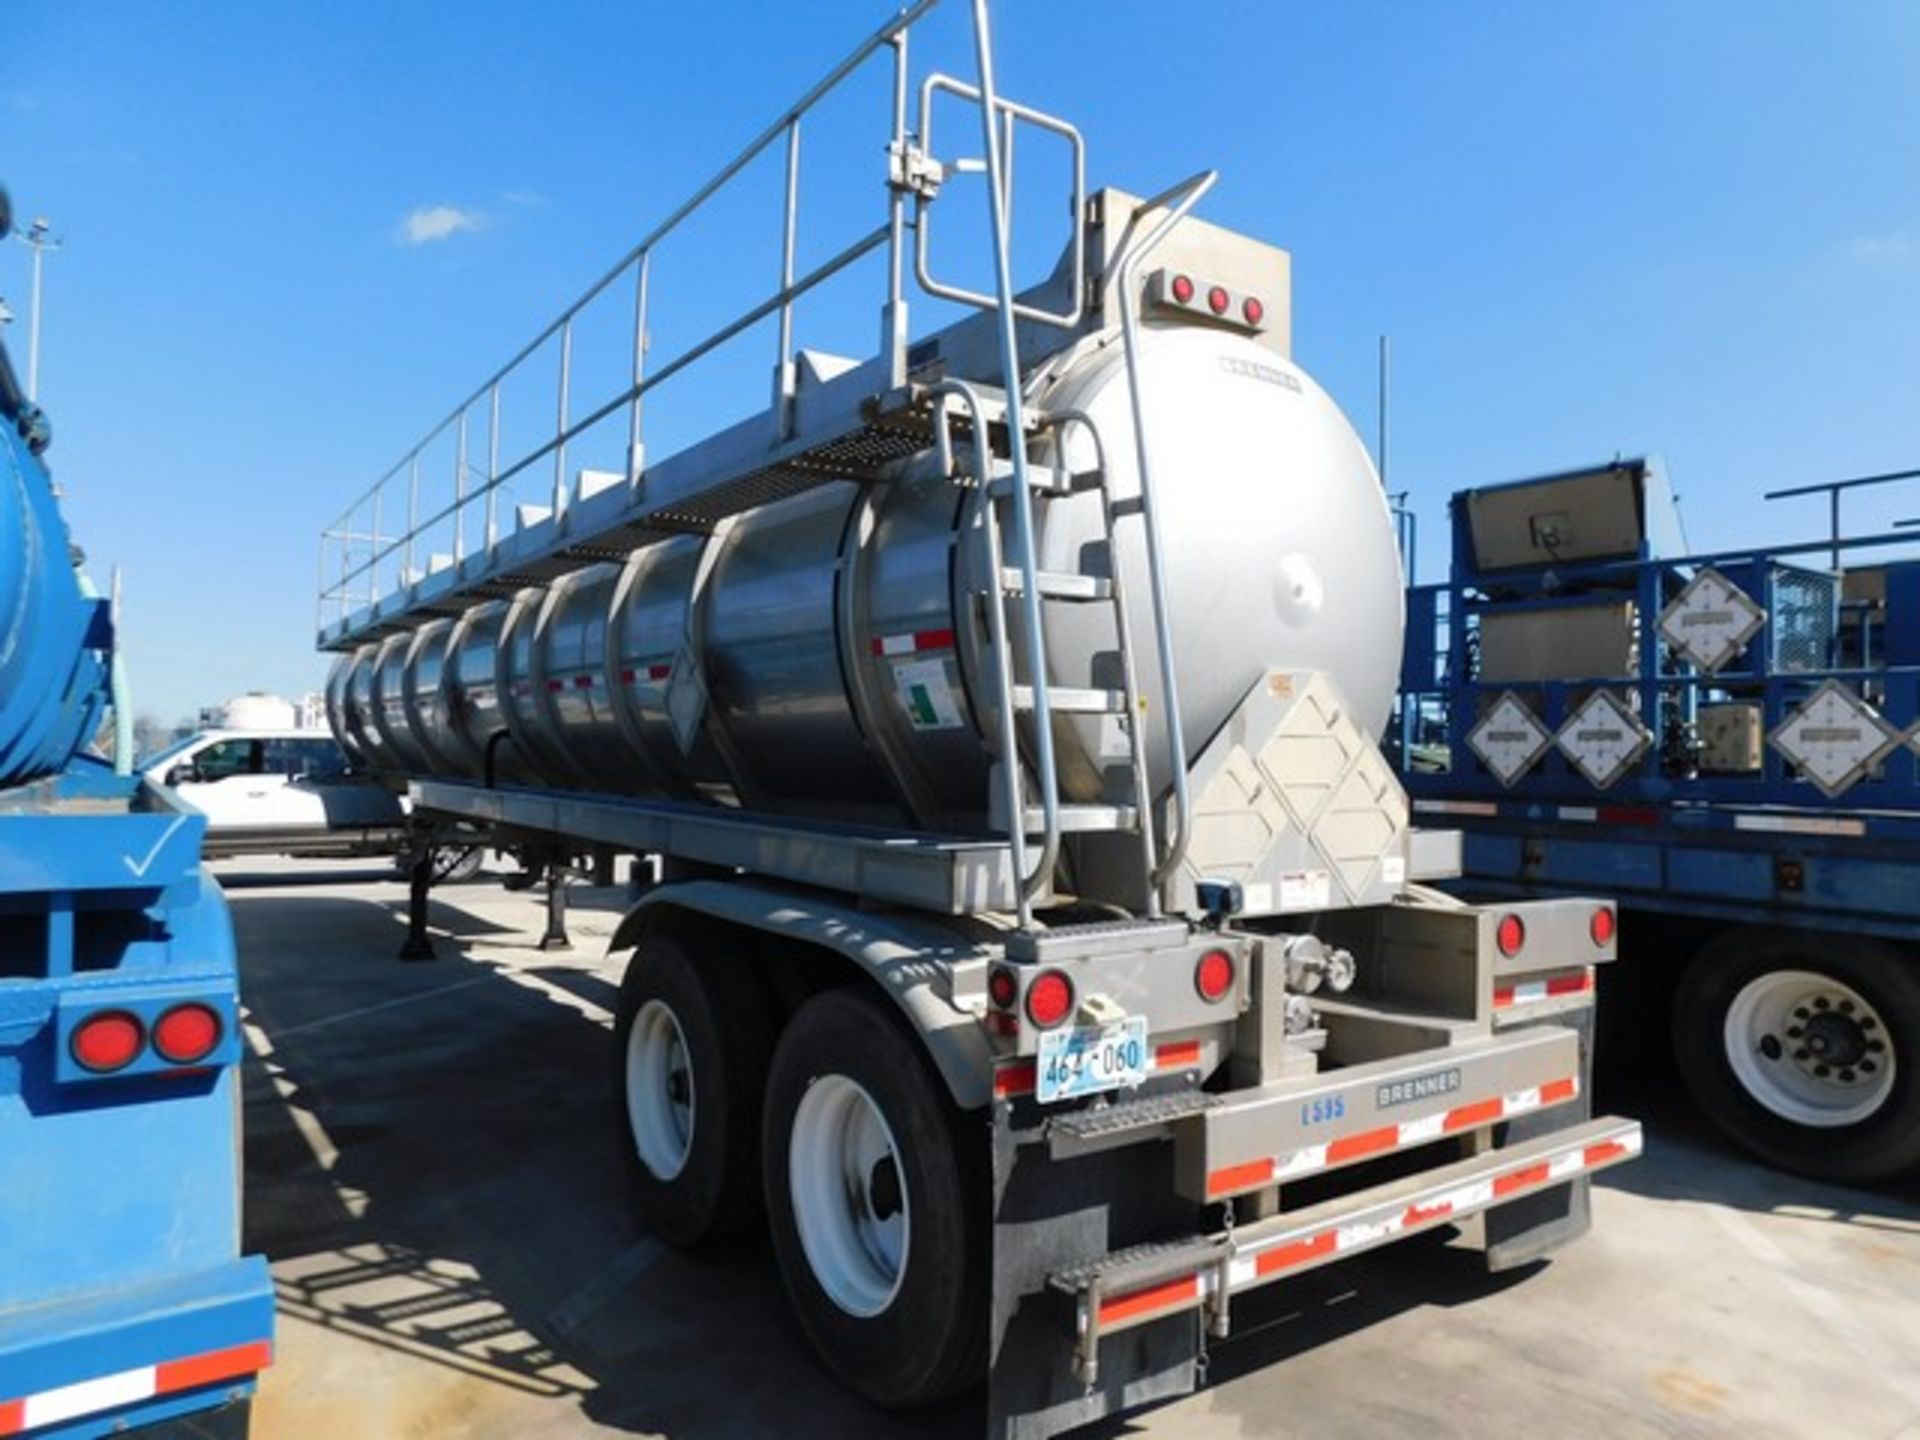 Located in YARD 1 - San Antonio, TX - (FTF-165) 2014 BRENNER TANK T/A 6K GALLON, - Image 3 of 7